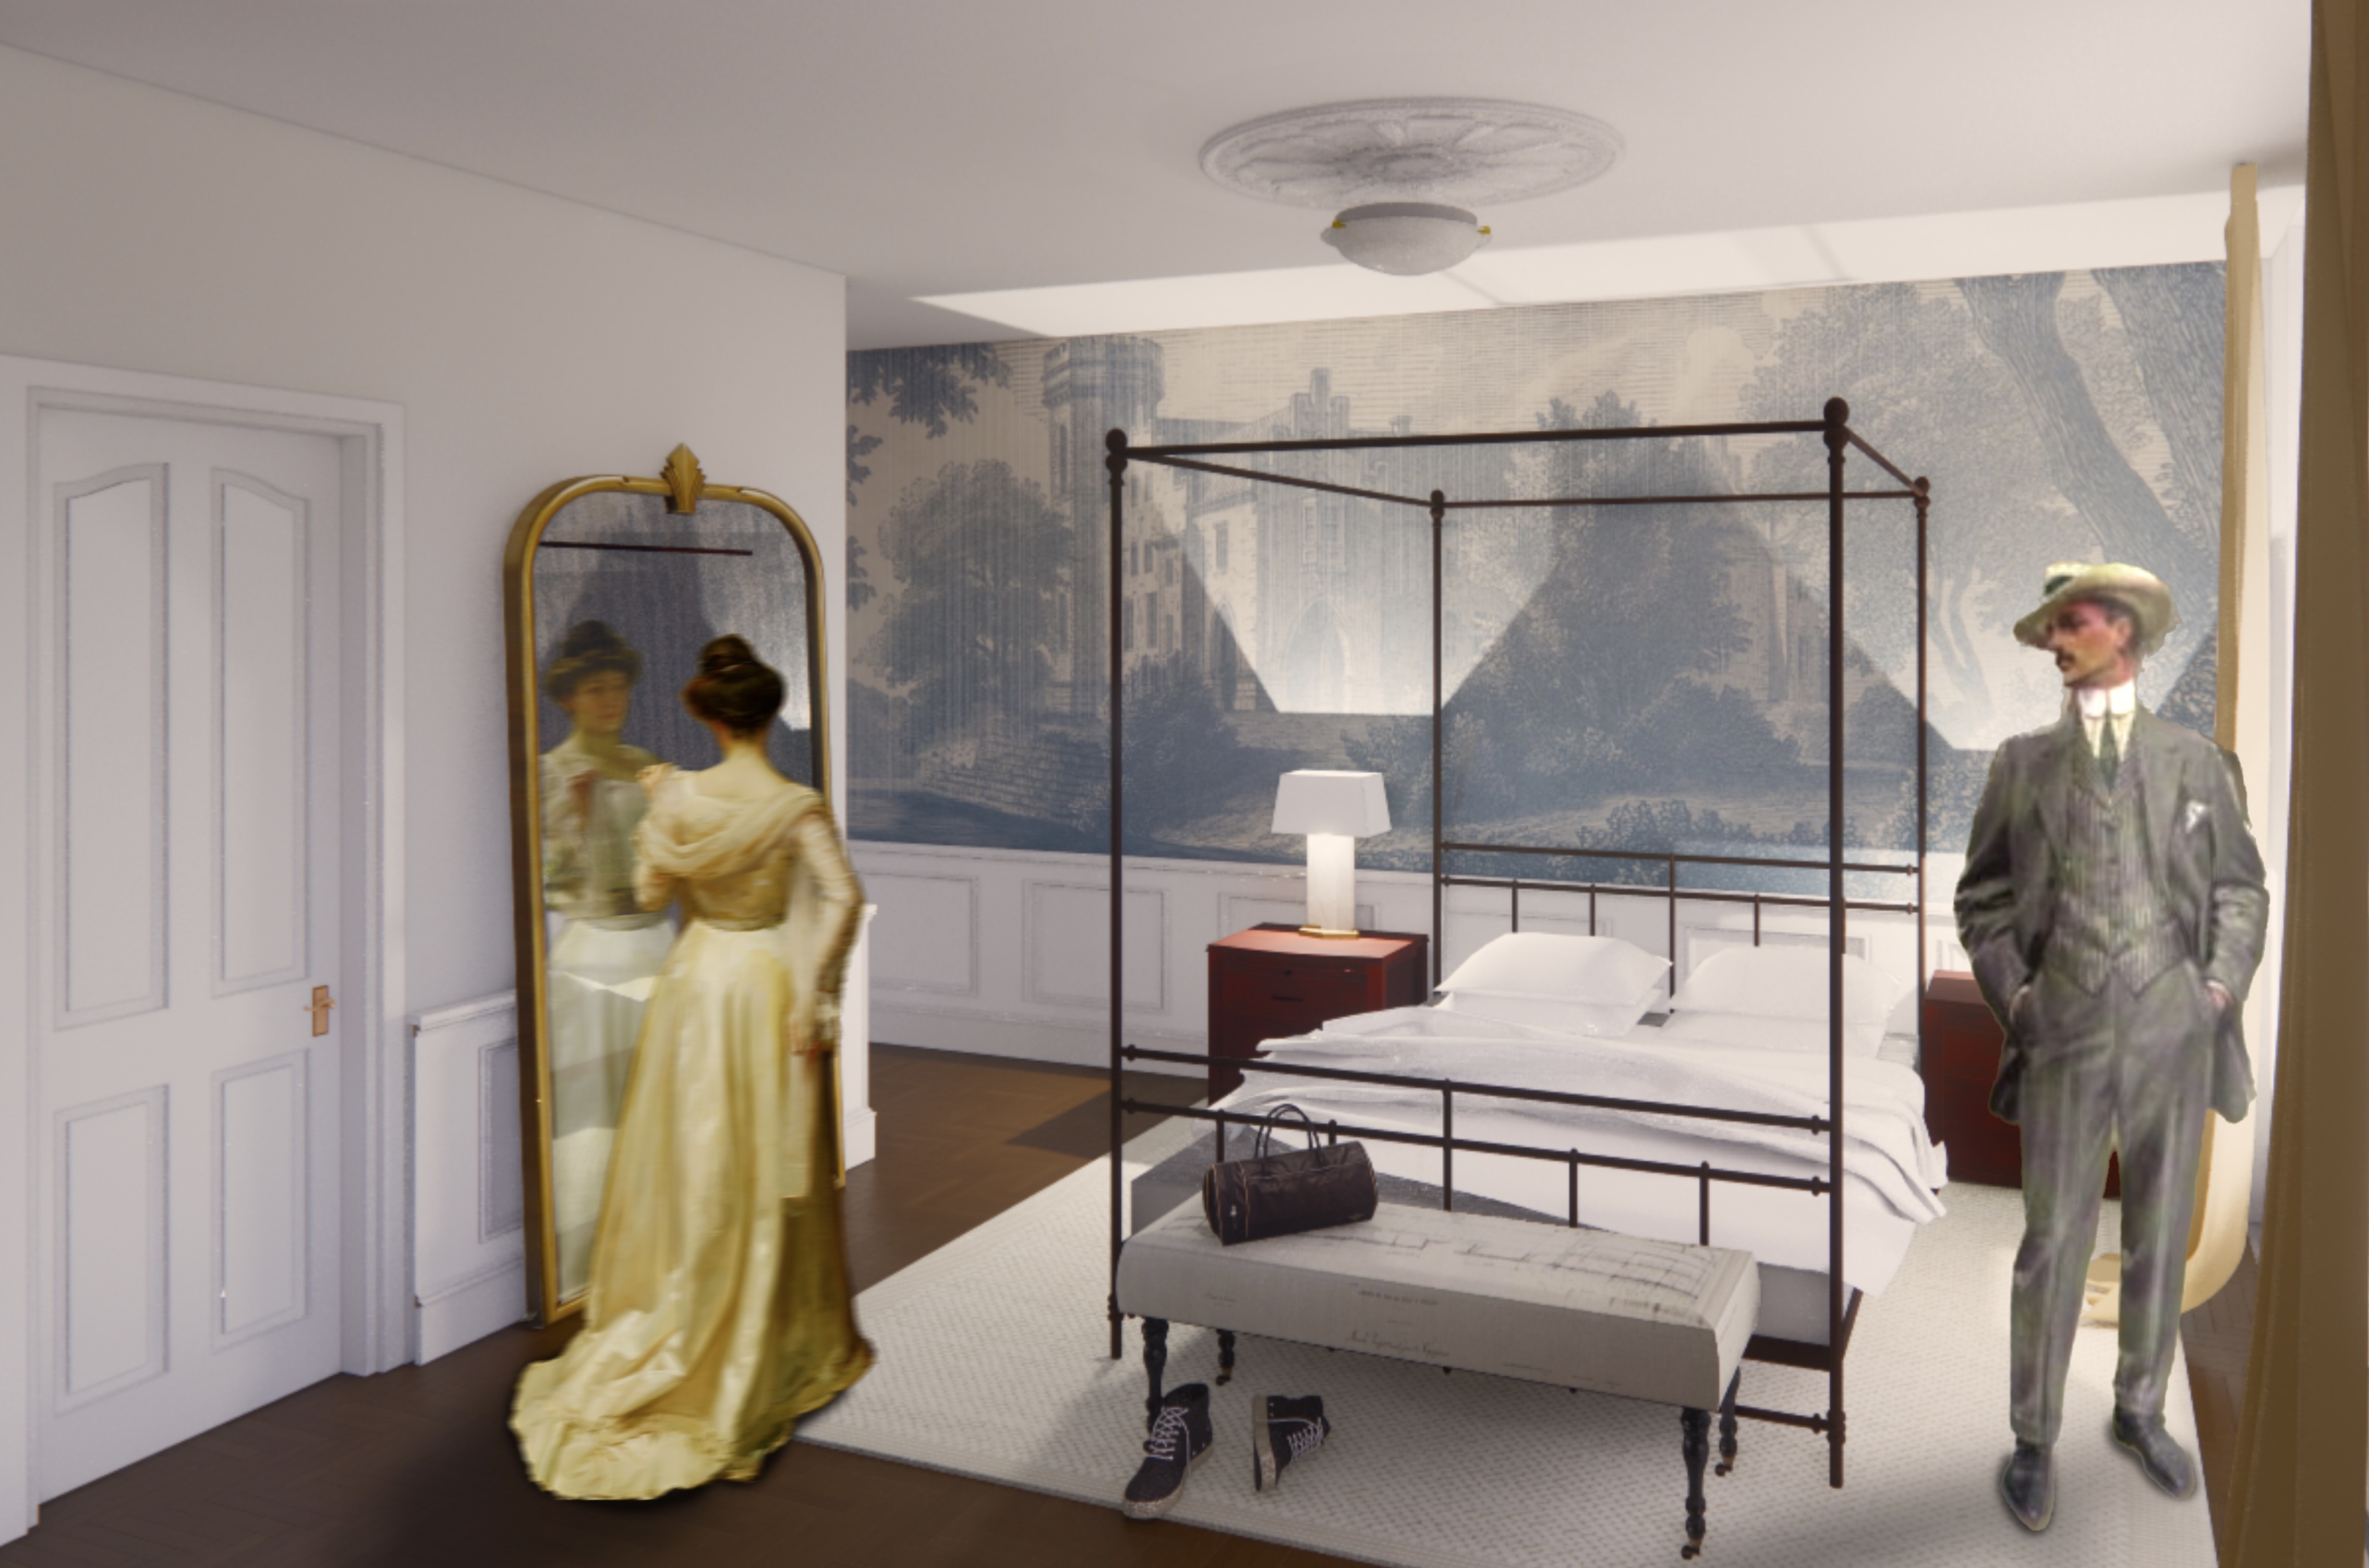 Rendering by Albert of a bedroom for The Efficient Edwardian project depicting a man and woman in Edwardian dress. The room contains a metal four poster bed, a free standing floor length mirror, and a large wall print in the Romantic style depicting a landscape and castle.